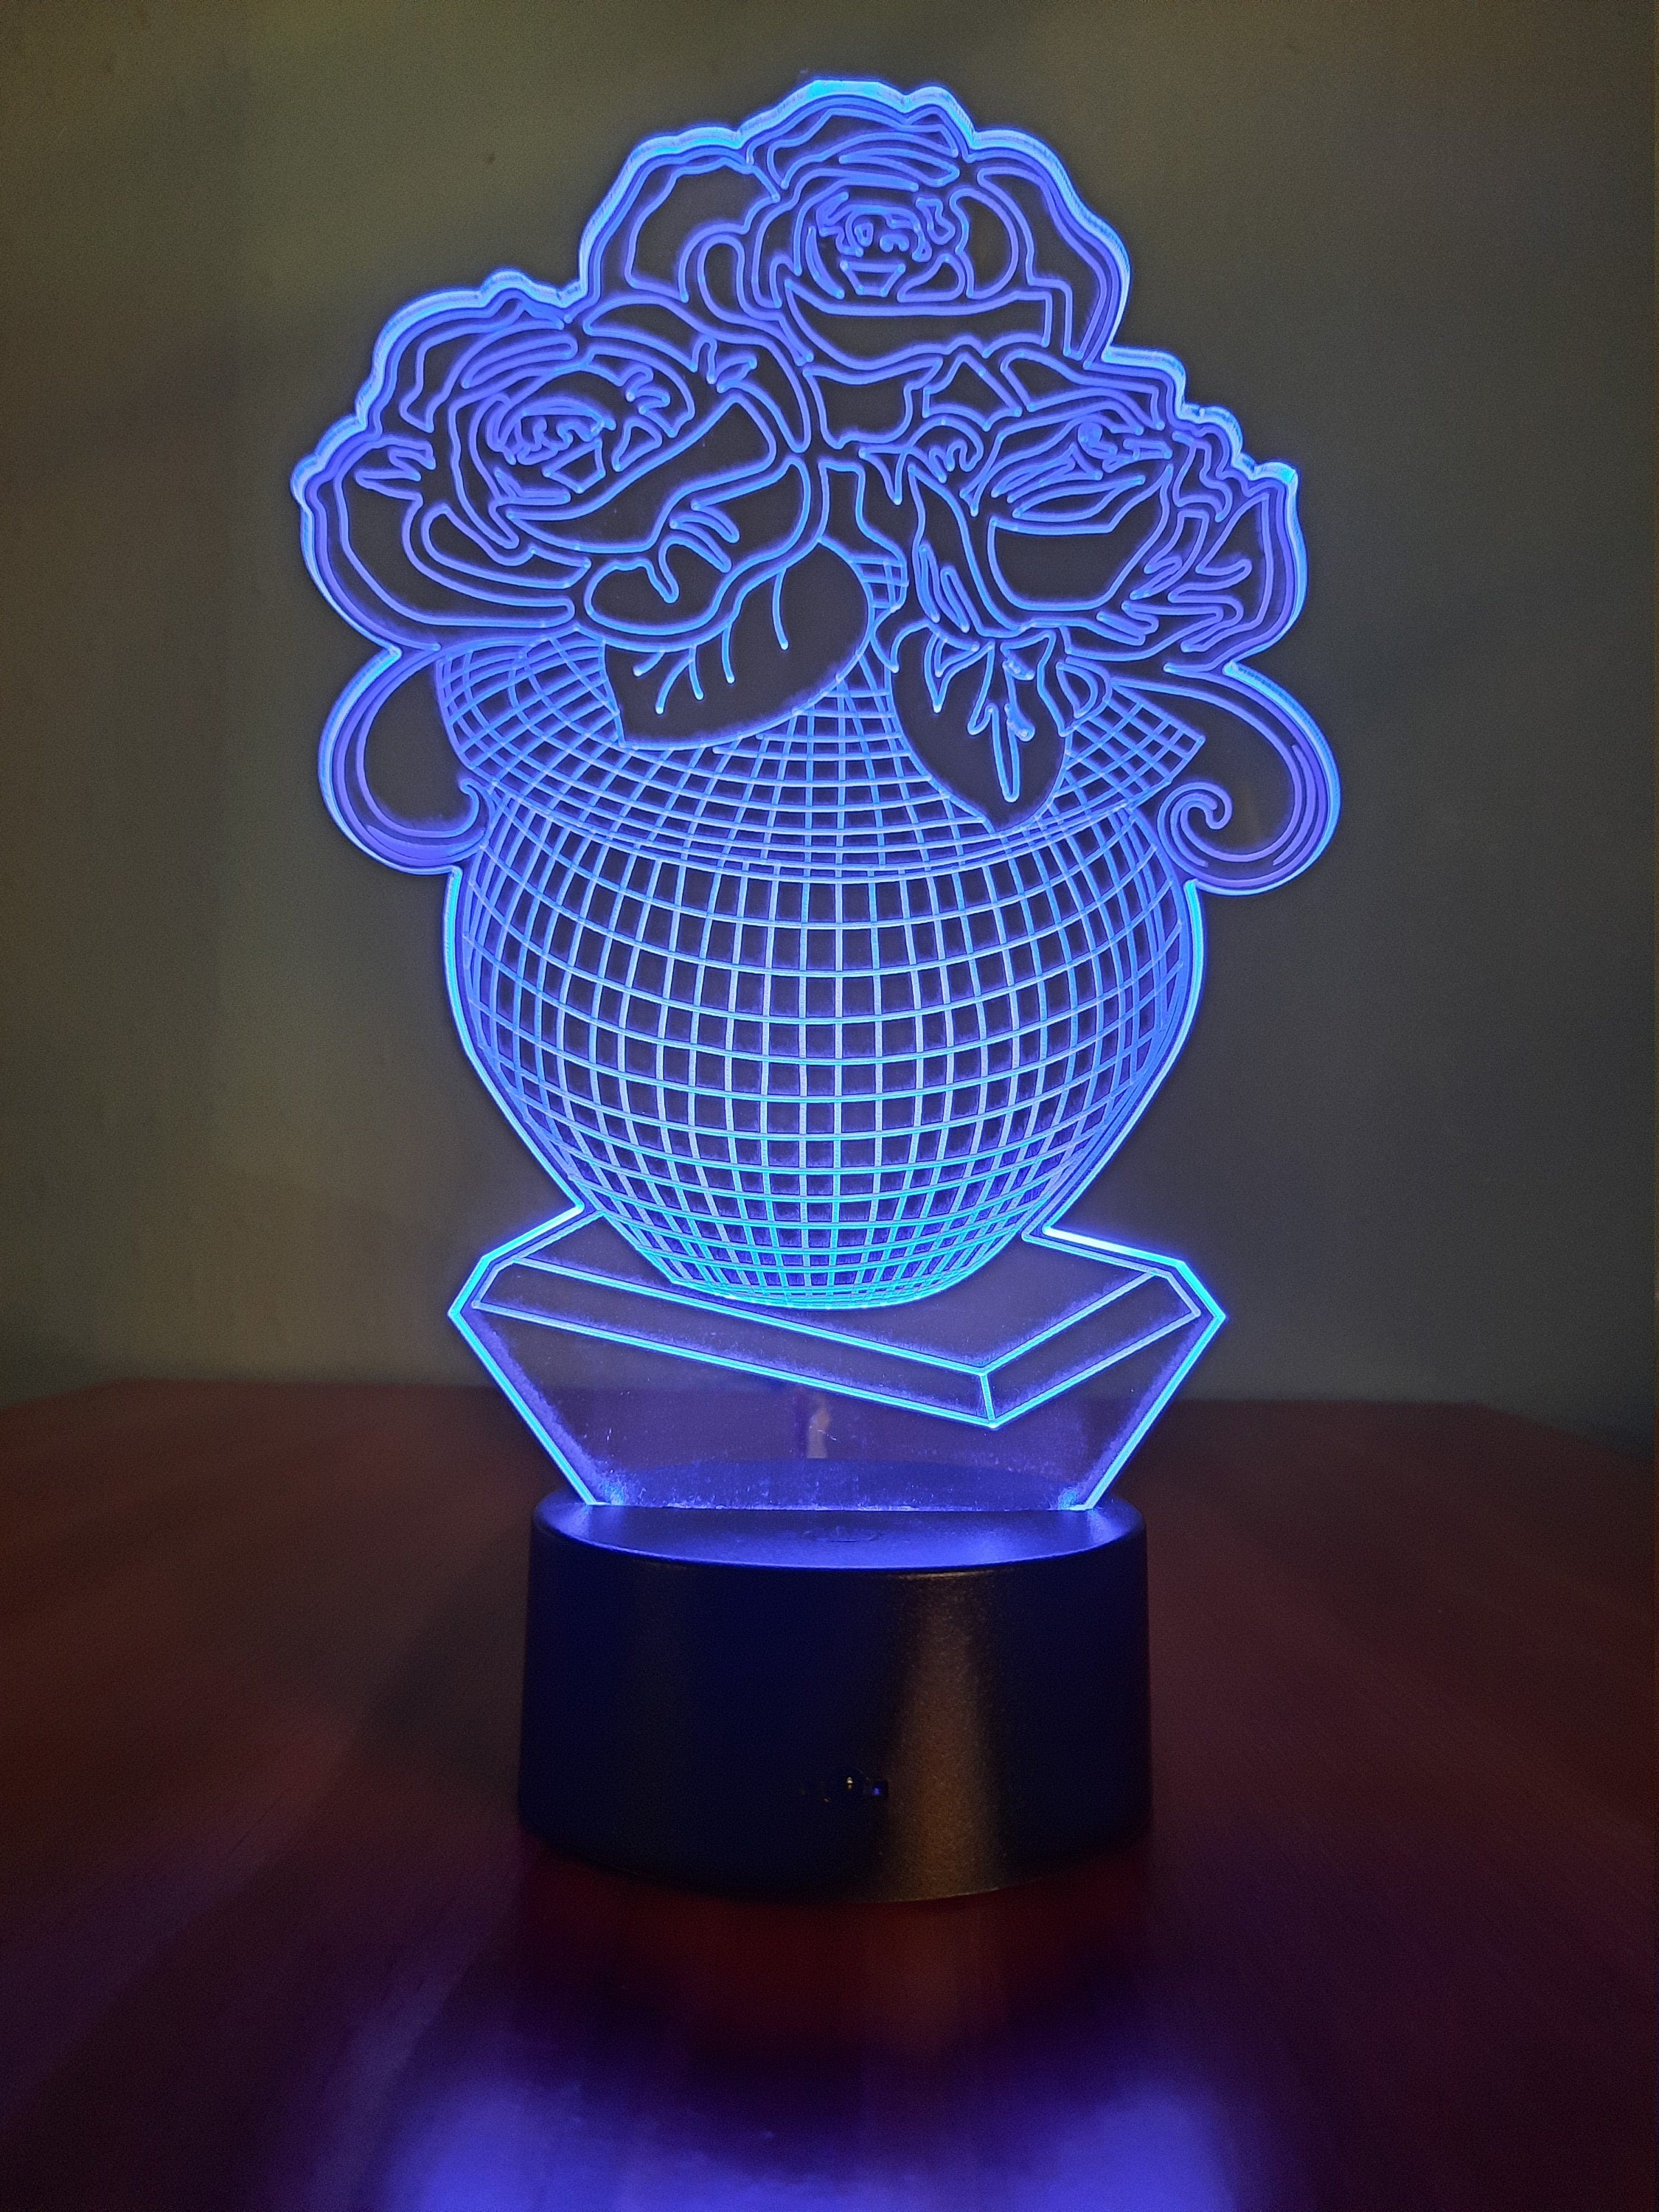 Awesome "Vase of Roses" 3D LED Lamp (1140) - FREE SHIPPING!